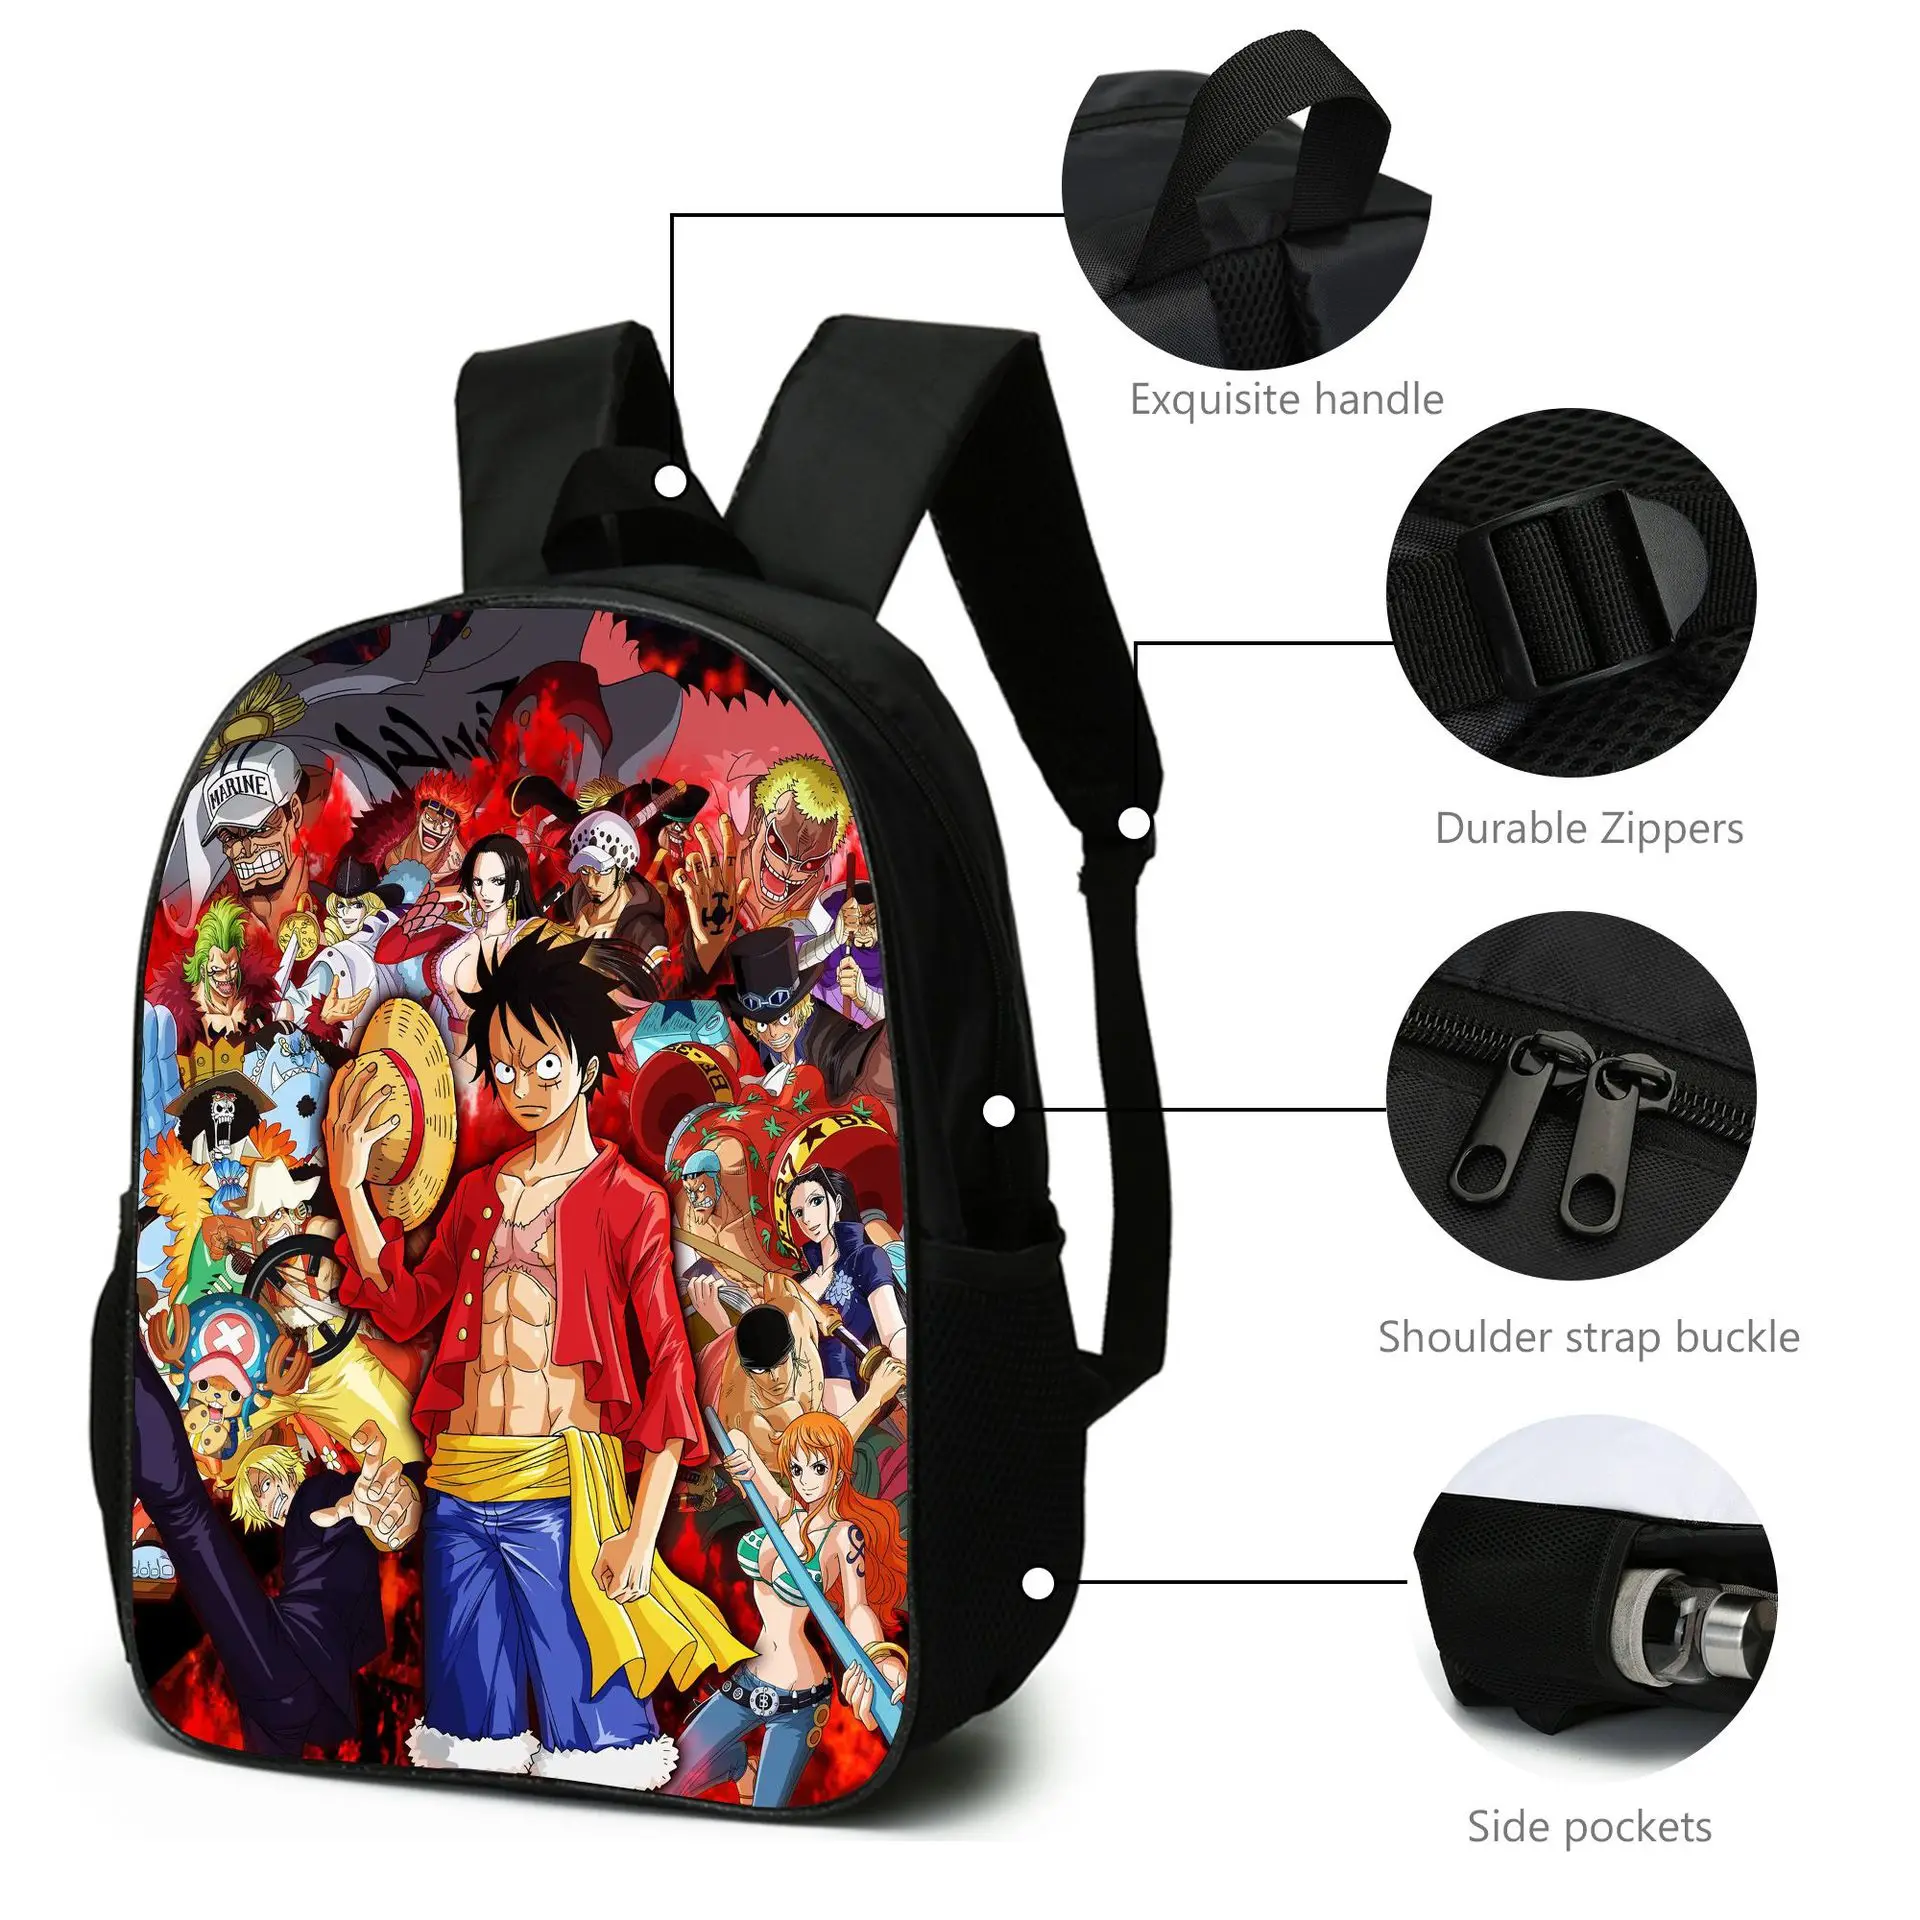  Set New Anime Bag One Piece Backpack Luffy Figures Kids School Bags Pen and Messenger